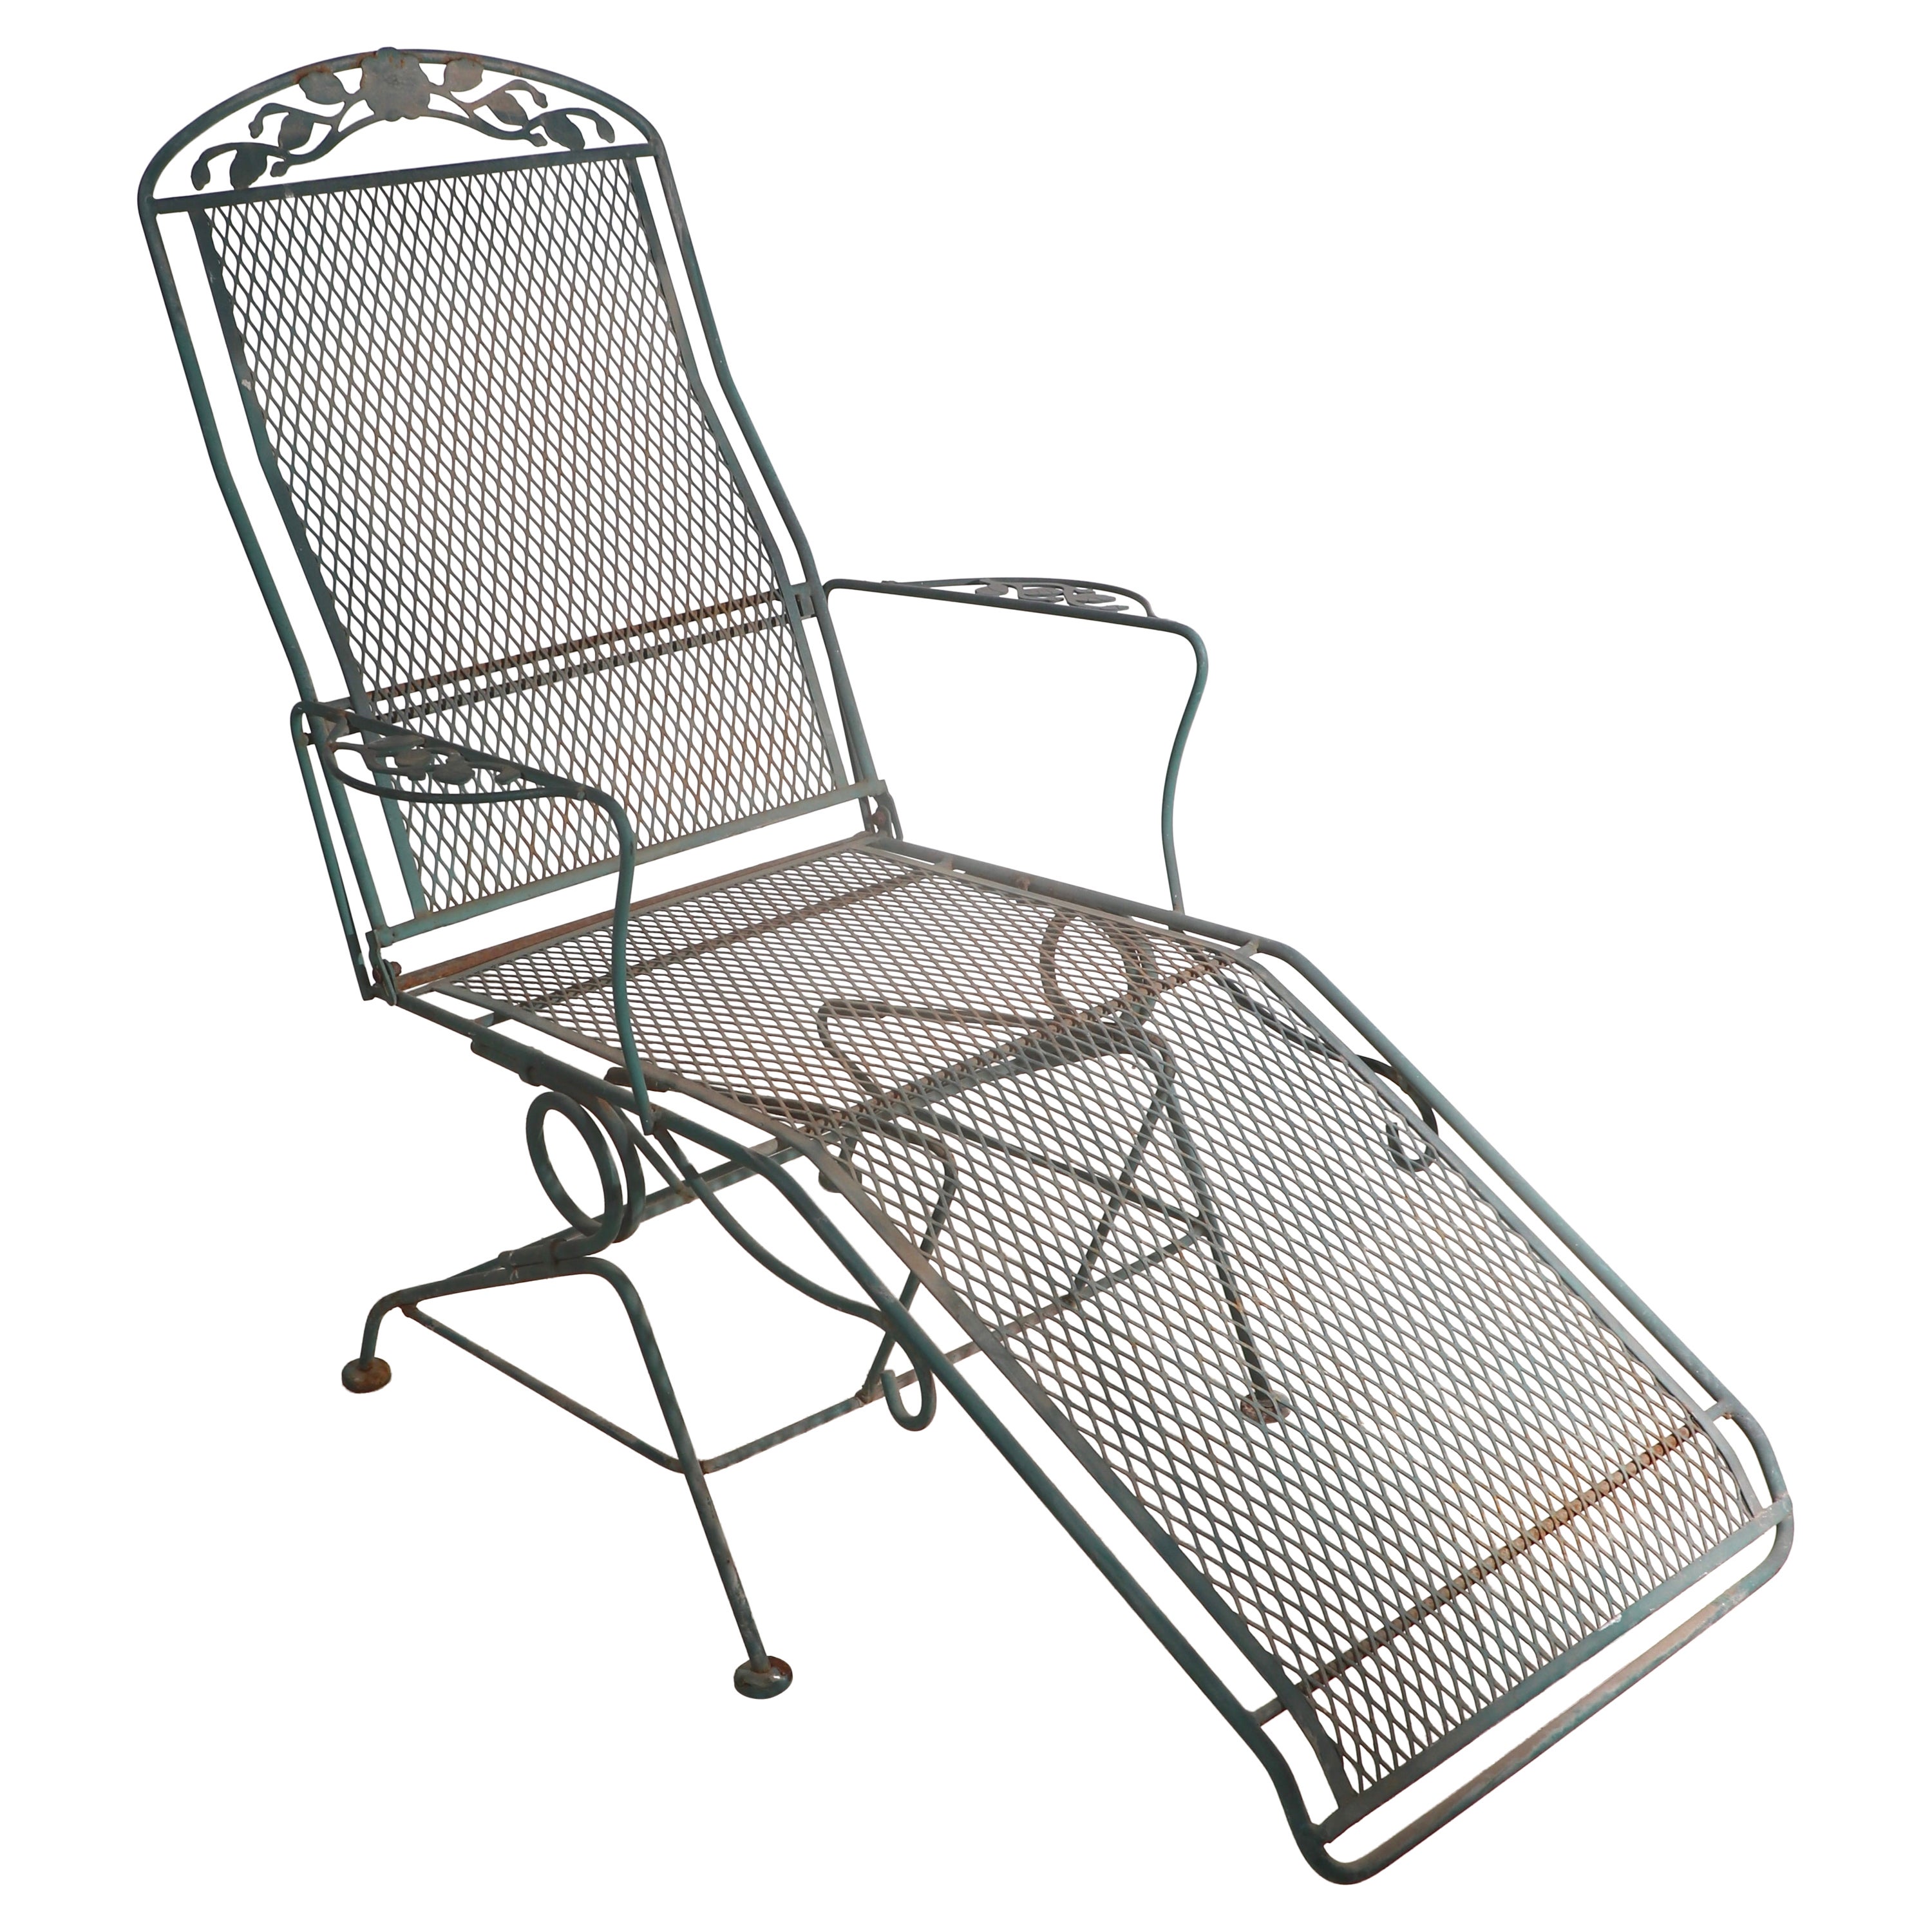 Wrought Iron Garden Patio Poolside Chaise Lounge Briarwood by Meadowcraft  For Sale at 1stDibs | vintage meadowcraft patio furniture, wrought iron  lounge chairs, wrought iron chaise lounge